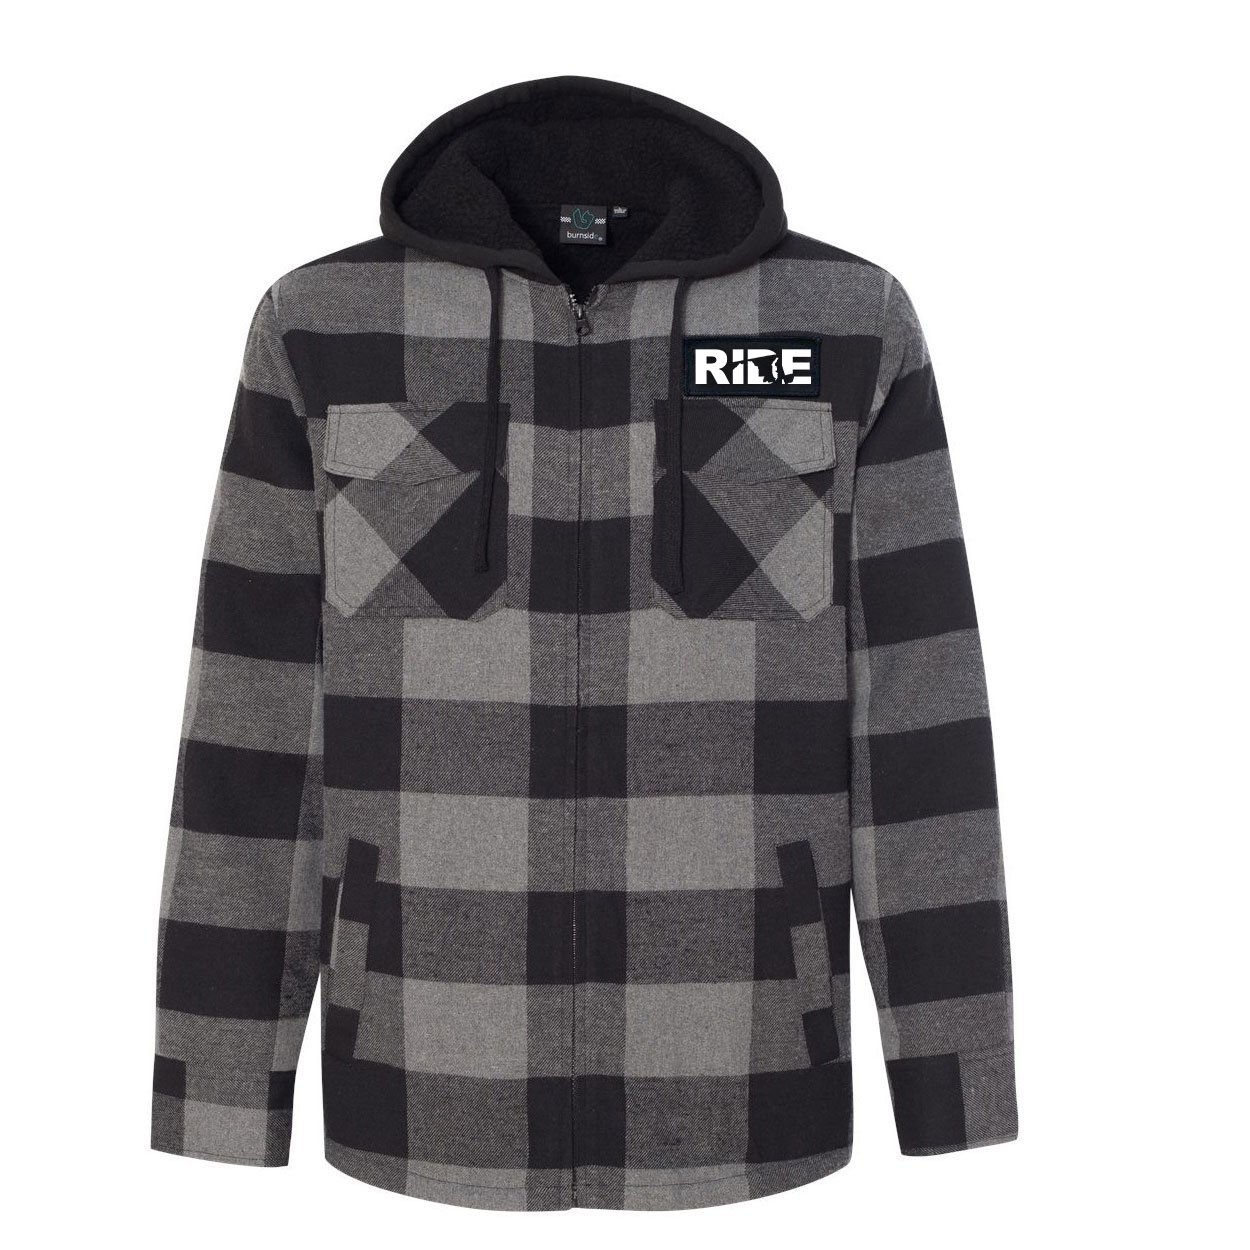 Ride Maryland Classic Unisex Full Zip Woven Patch Hooded Flannel Jacket Black/Gray (White Logo)